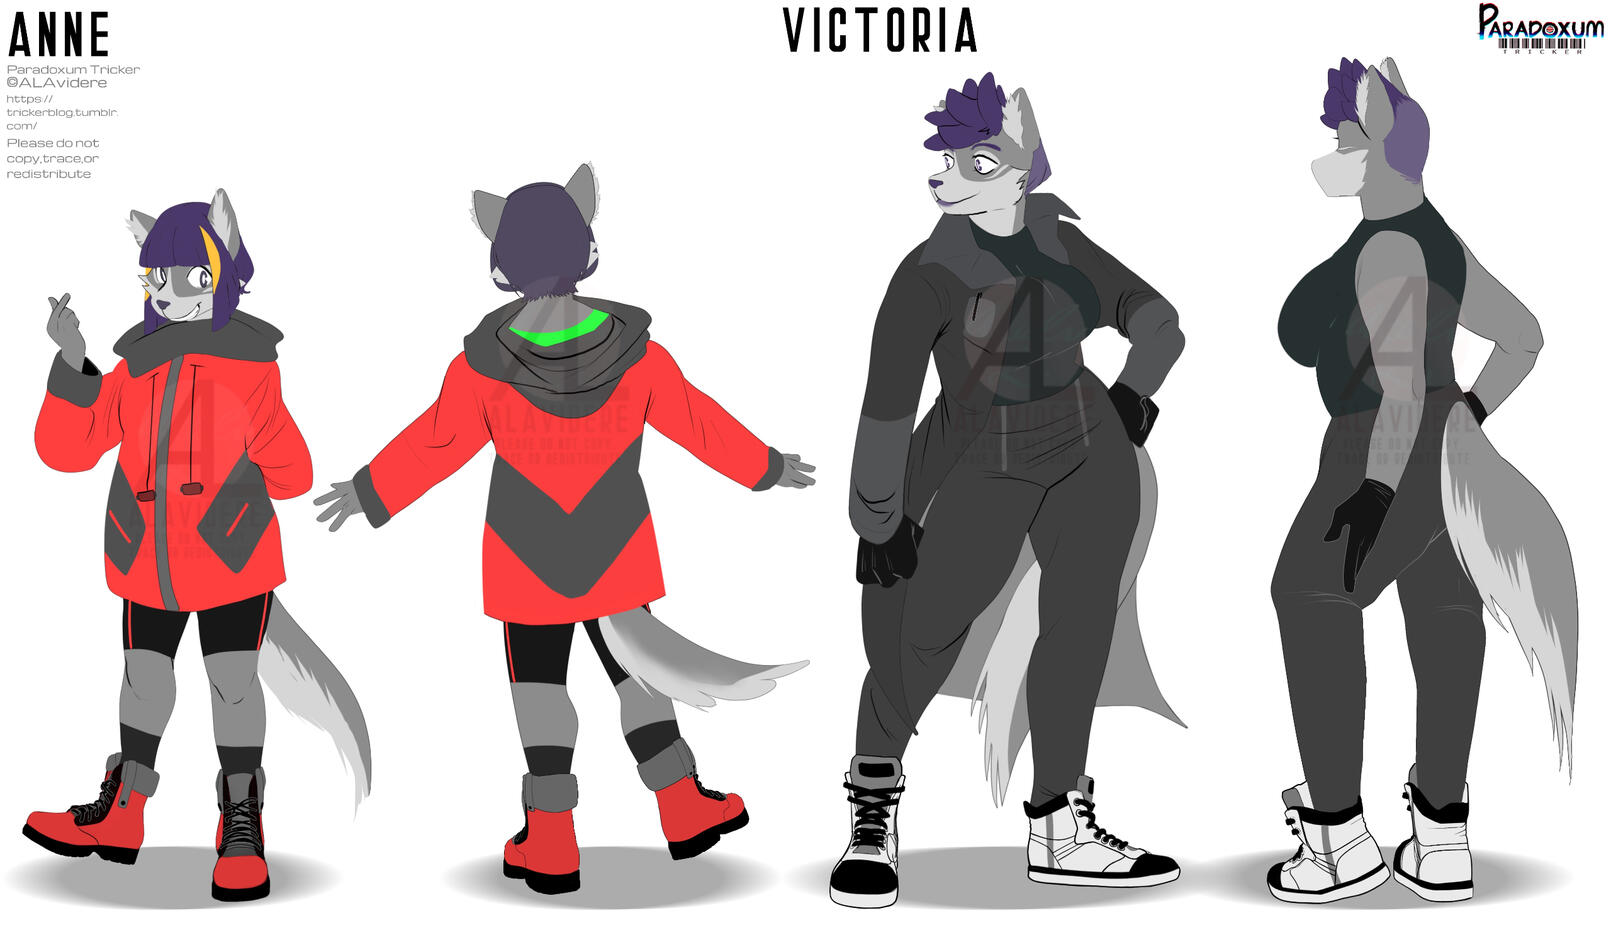 Anne and Victoria character sheet